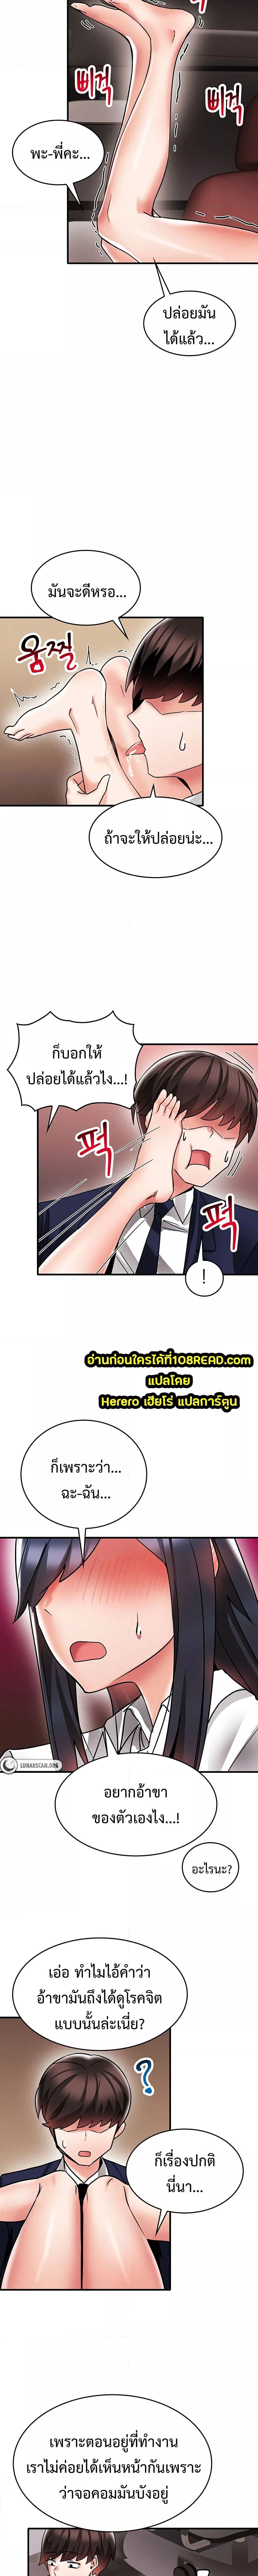 Relationship Reverse Button: Let’s Make Her Submissive ตอนที่ 9 ภาพ 11